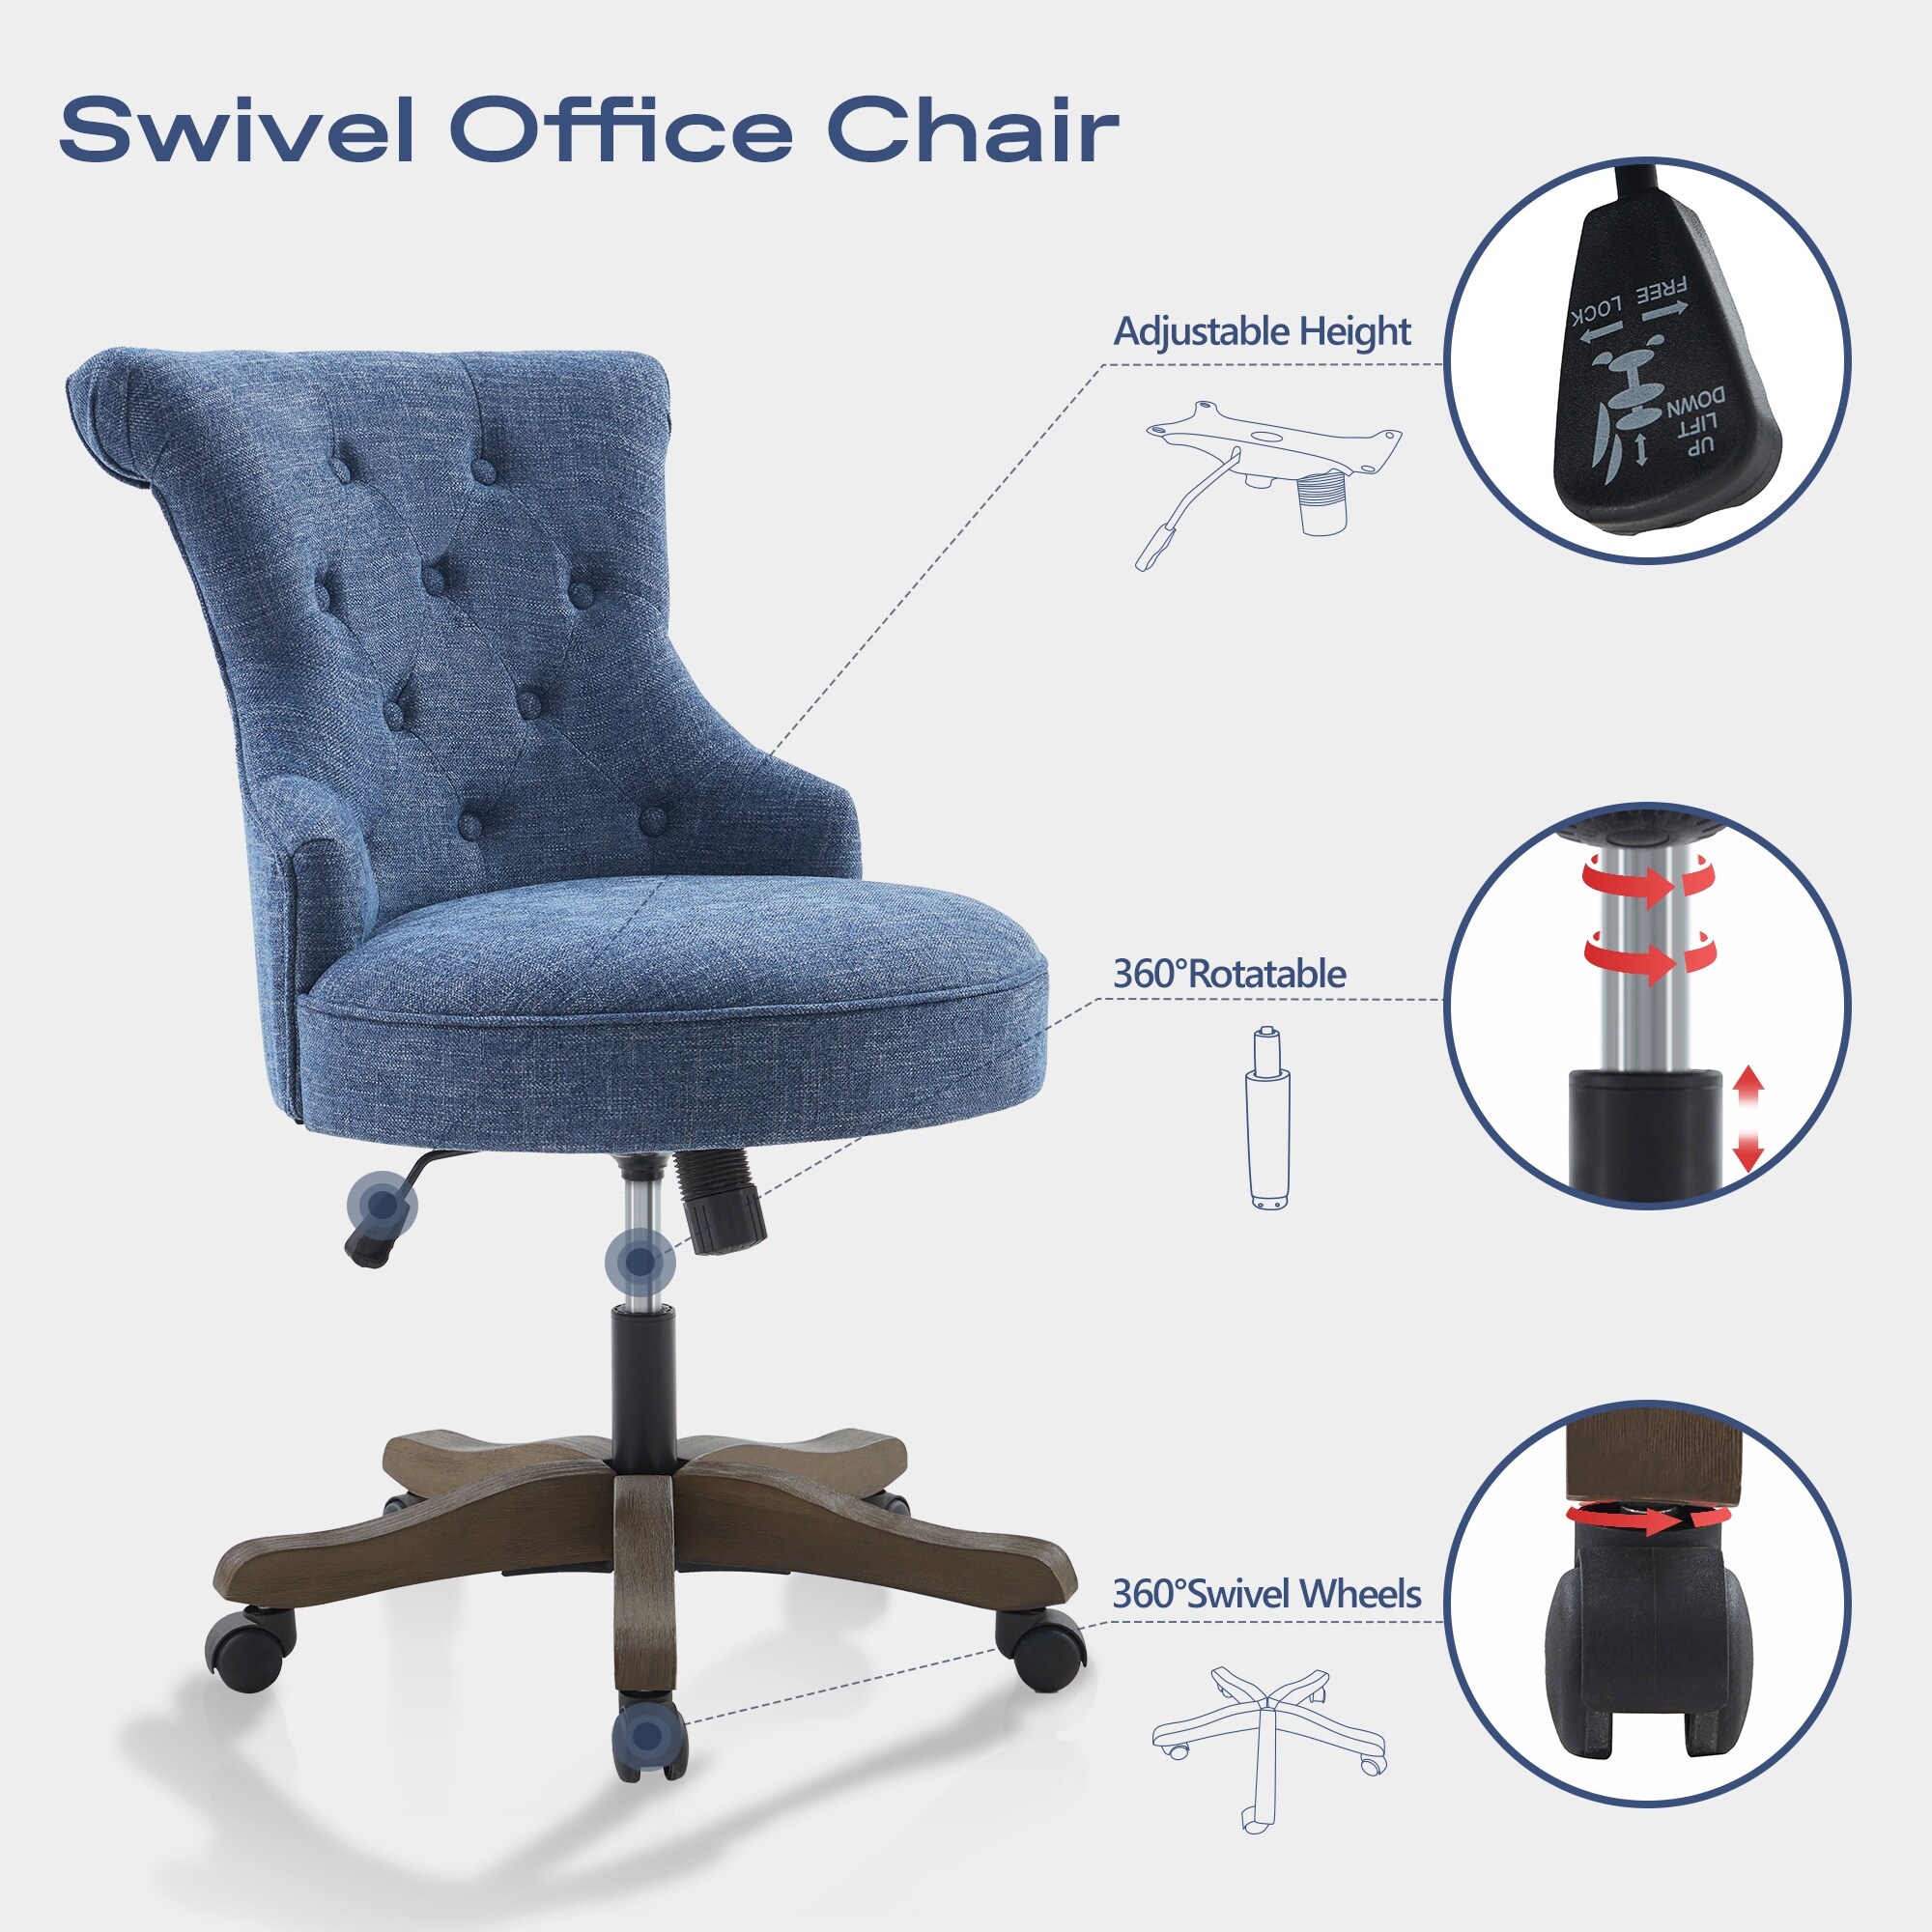 https://ak1.ostkcdn.com/images/products/is/images/direct/73943d6db3ea37f1a3d2c2770f969f8265ab9af6/HUIMO-Office-Chair-with-Wheels-Beige--Blue--Grey-Adjustable-Height%2C-Linen-Fabric-Upholstered-Computer-Desk-Chair-Swivel.jpg